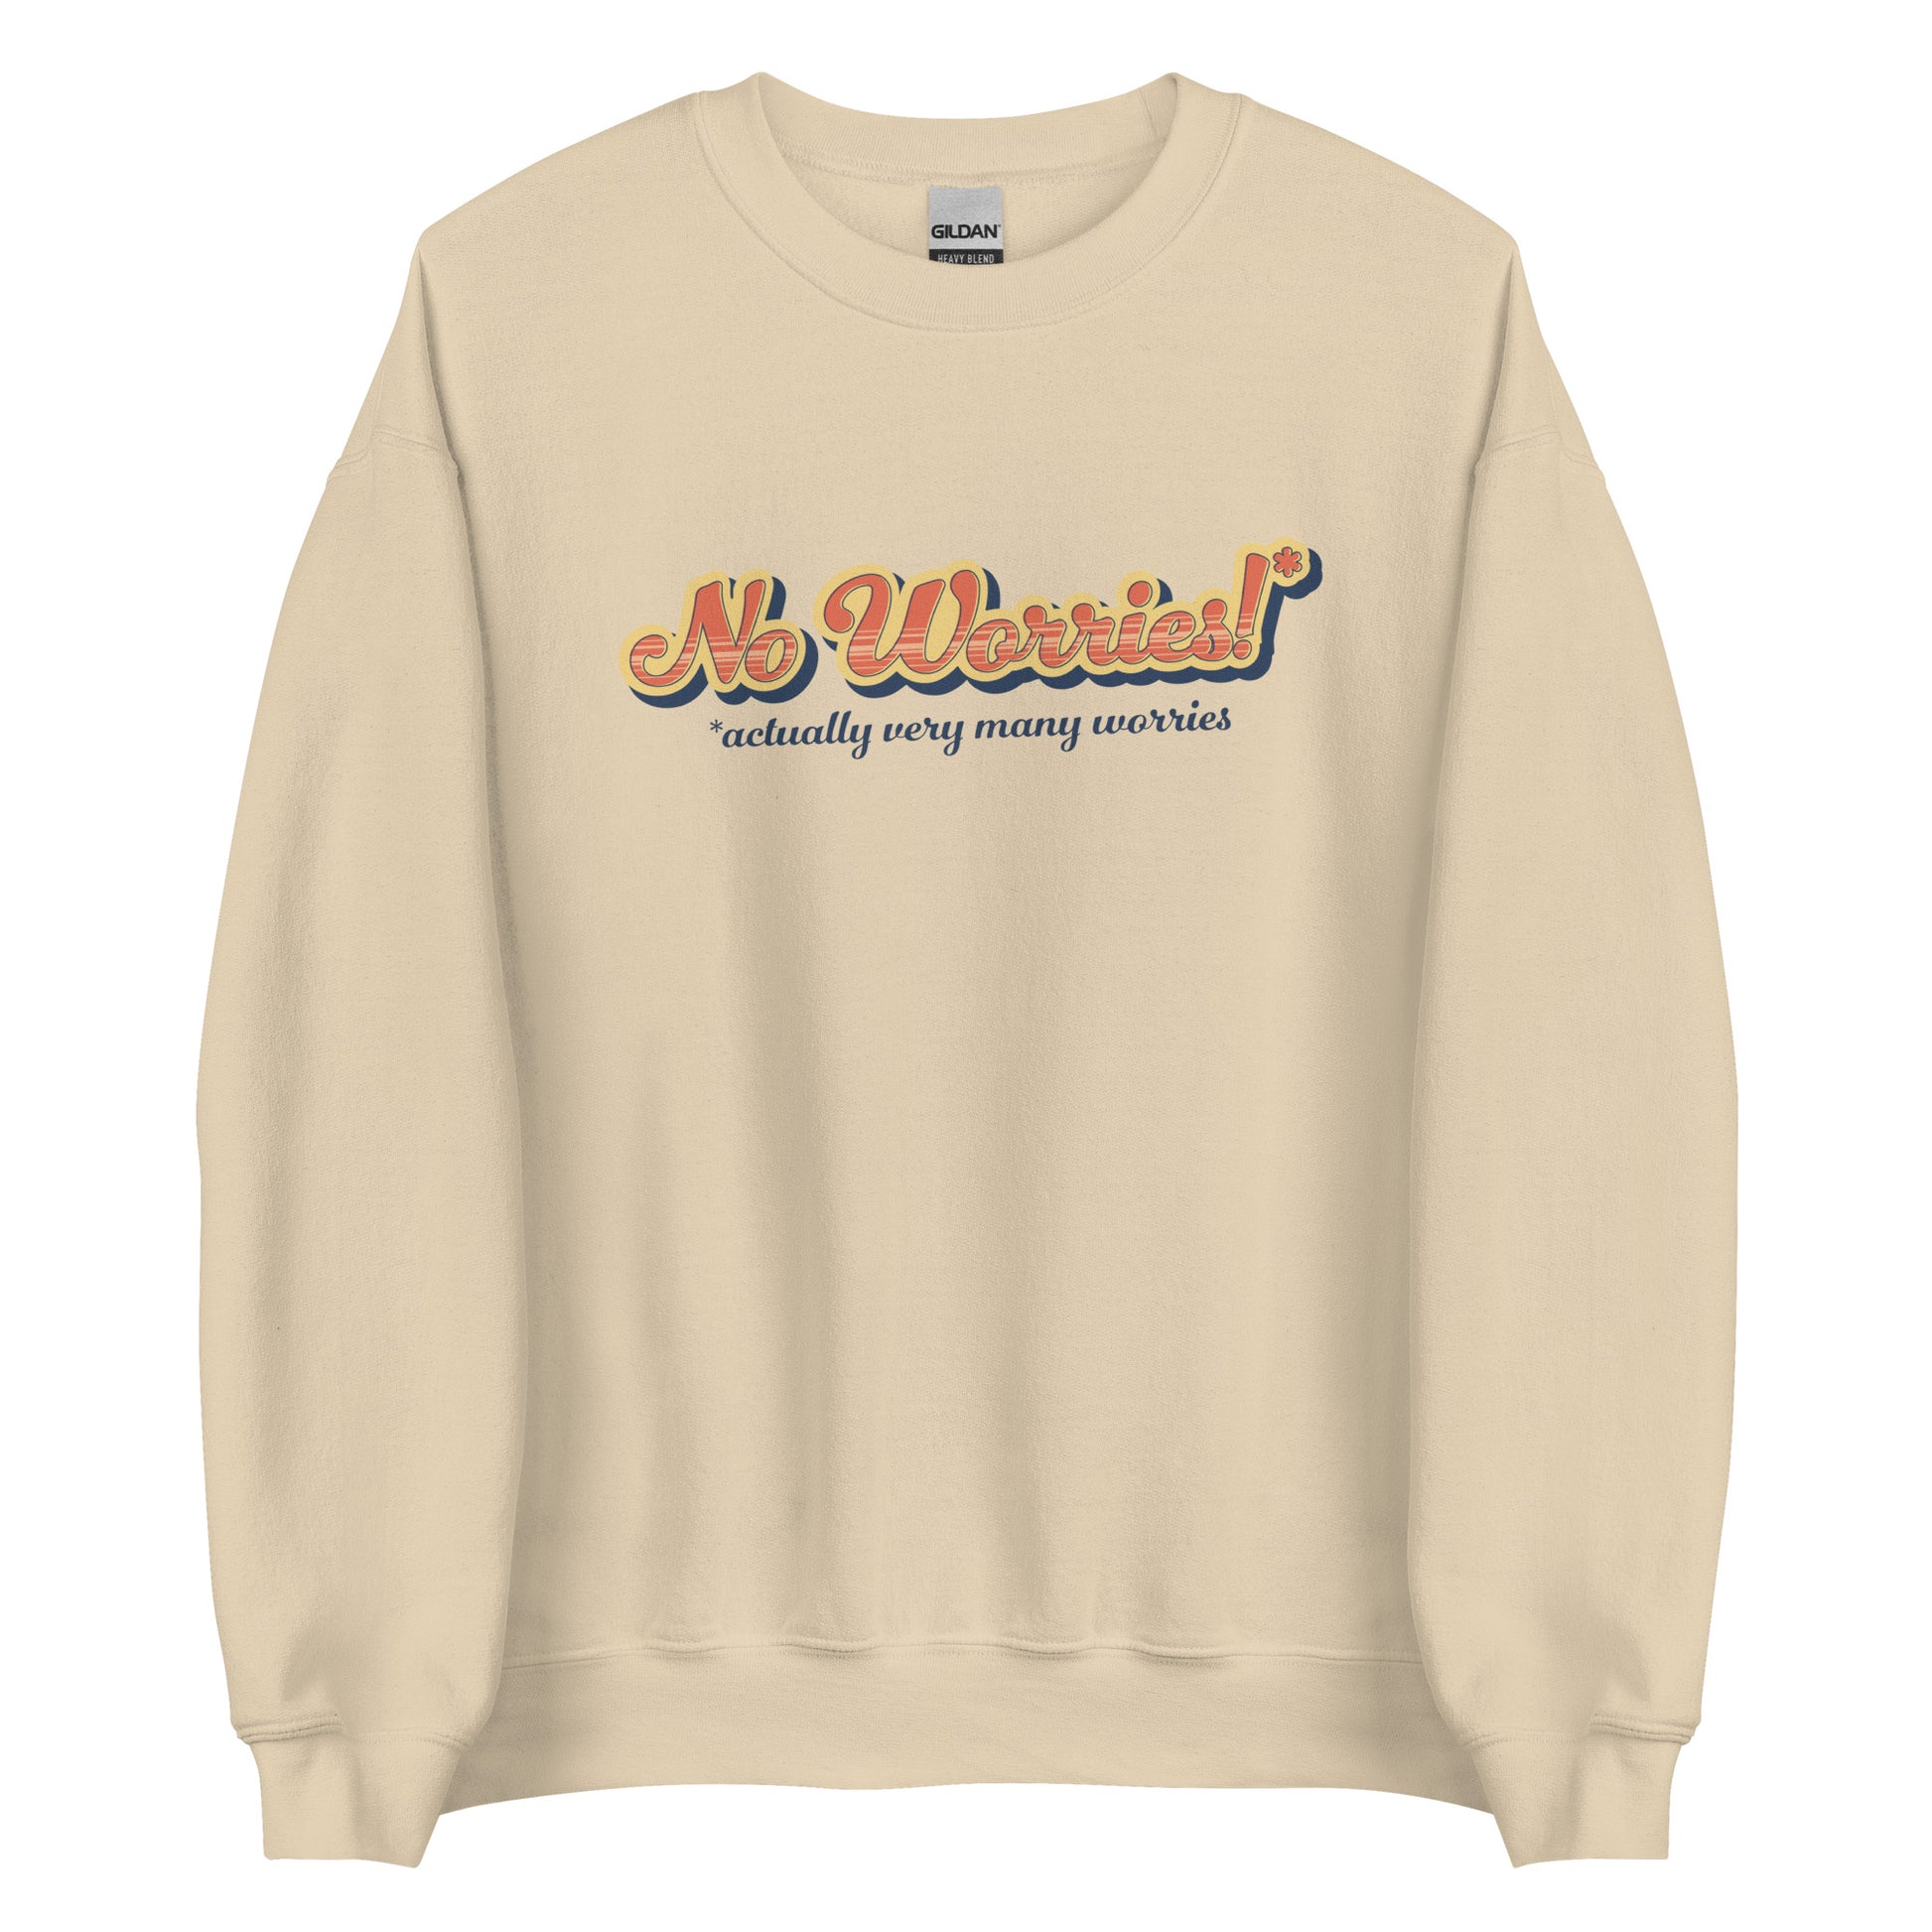 A light beige crewneck sweatshirt featuring vintage-style text that reads "No worries!* *actually very many worries"